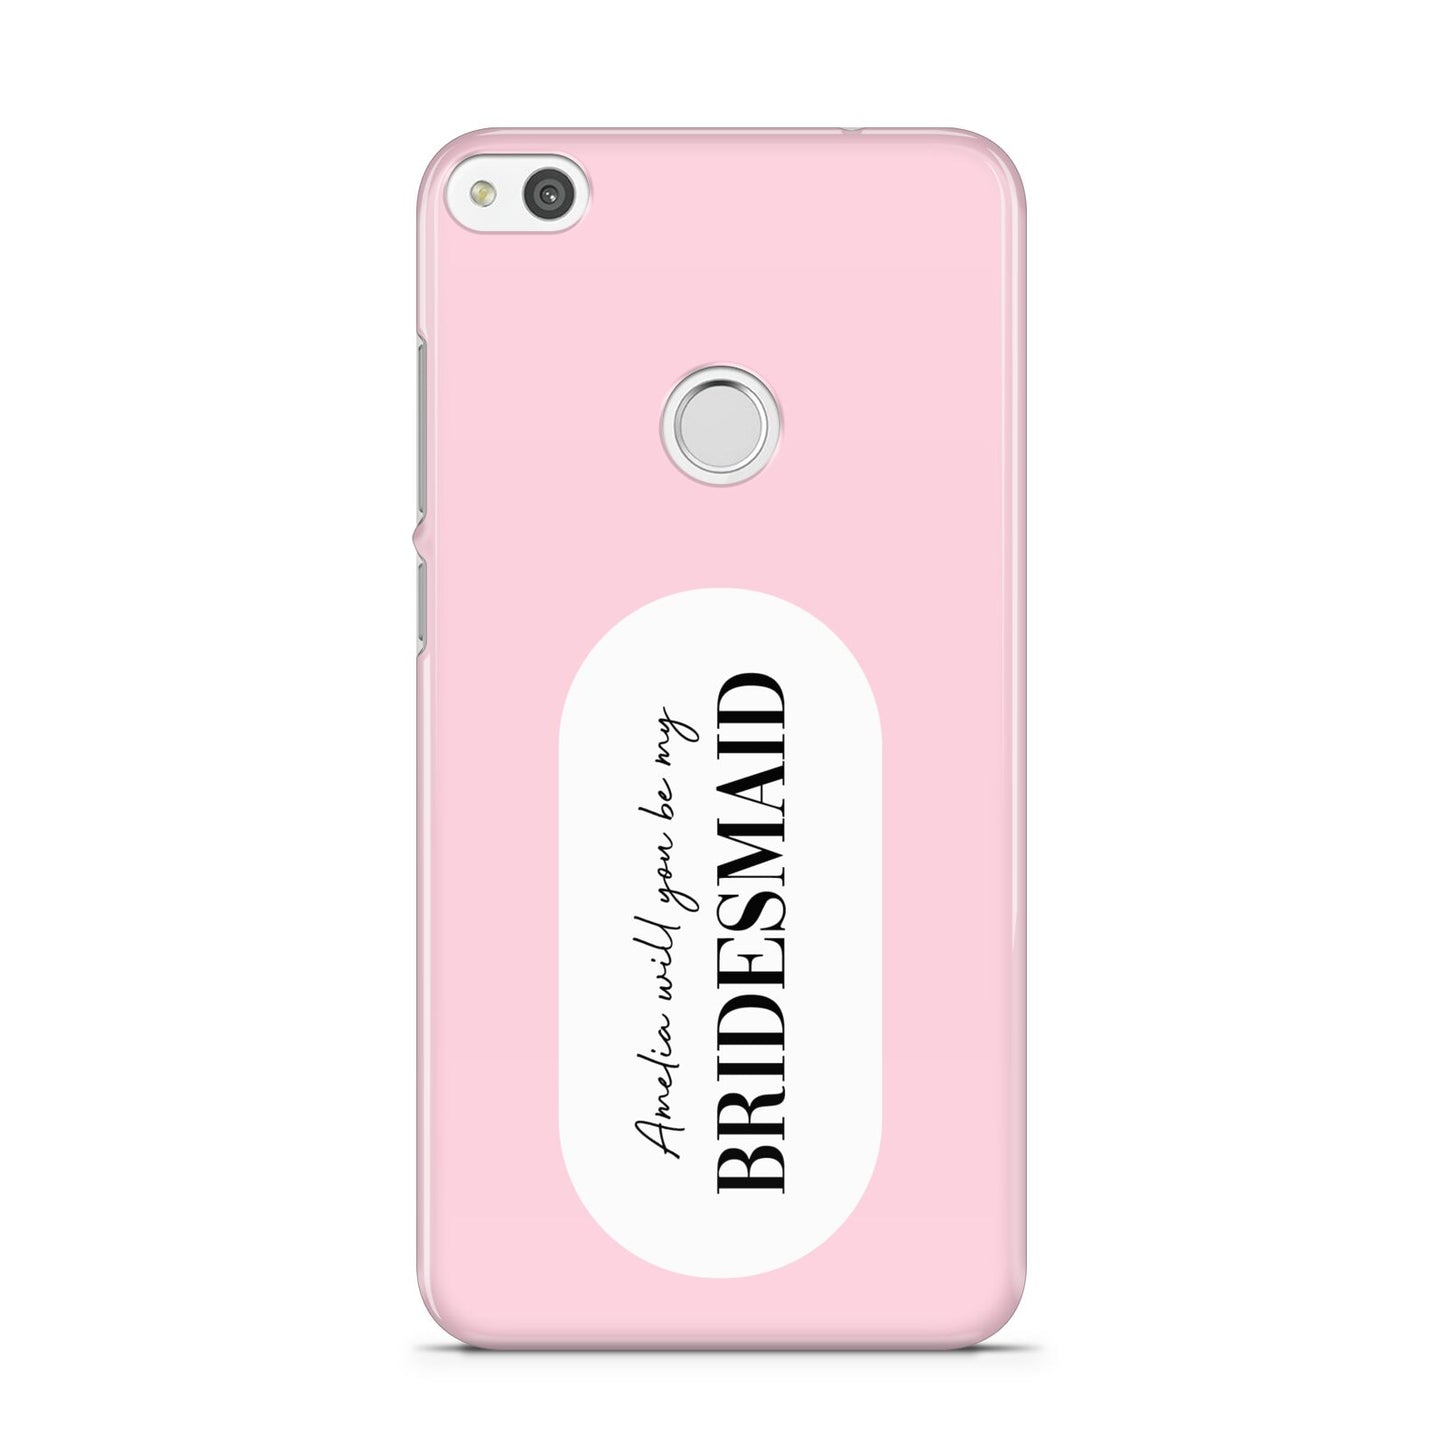 Will You Be My Bridesmaid Huawei P8 Lite Case